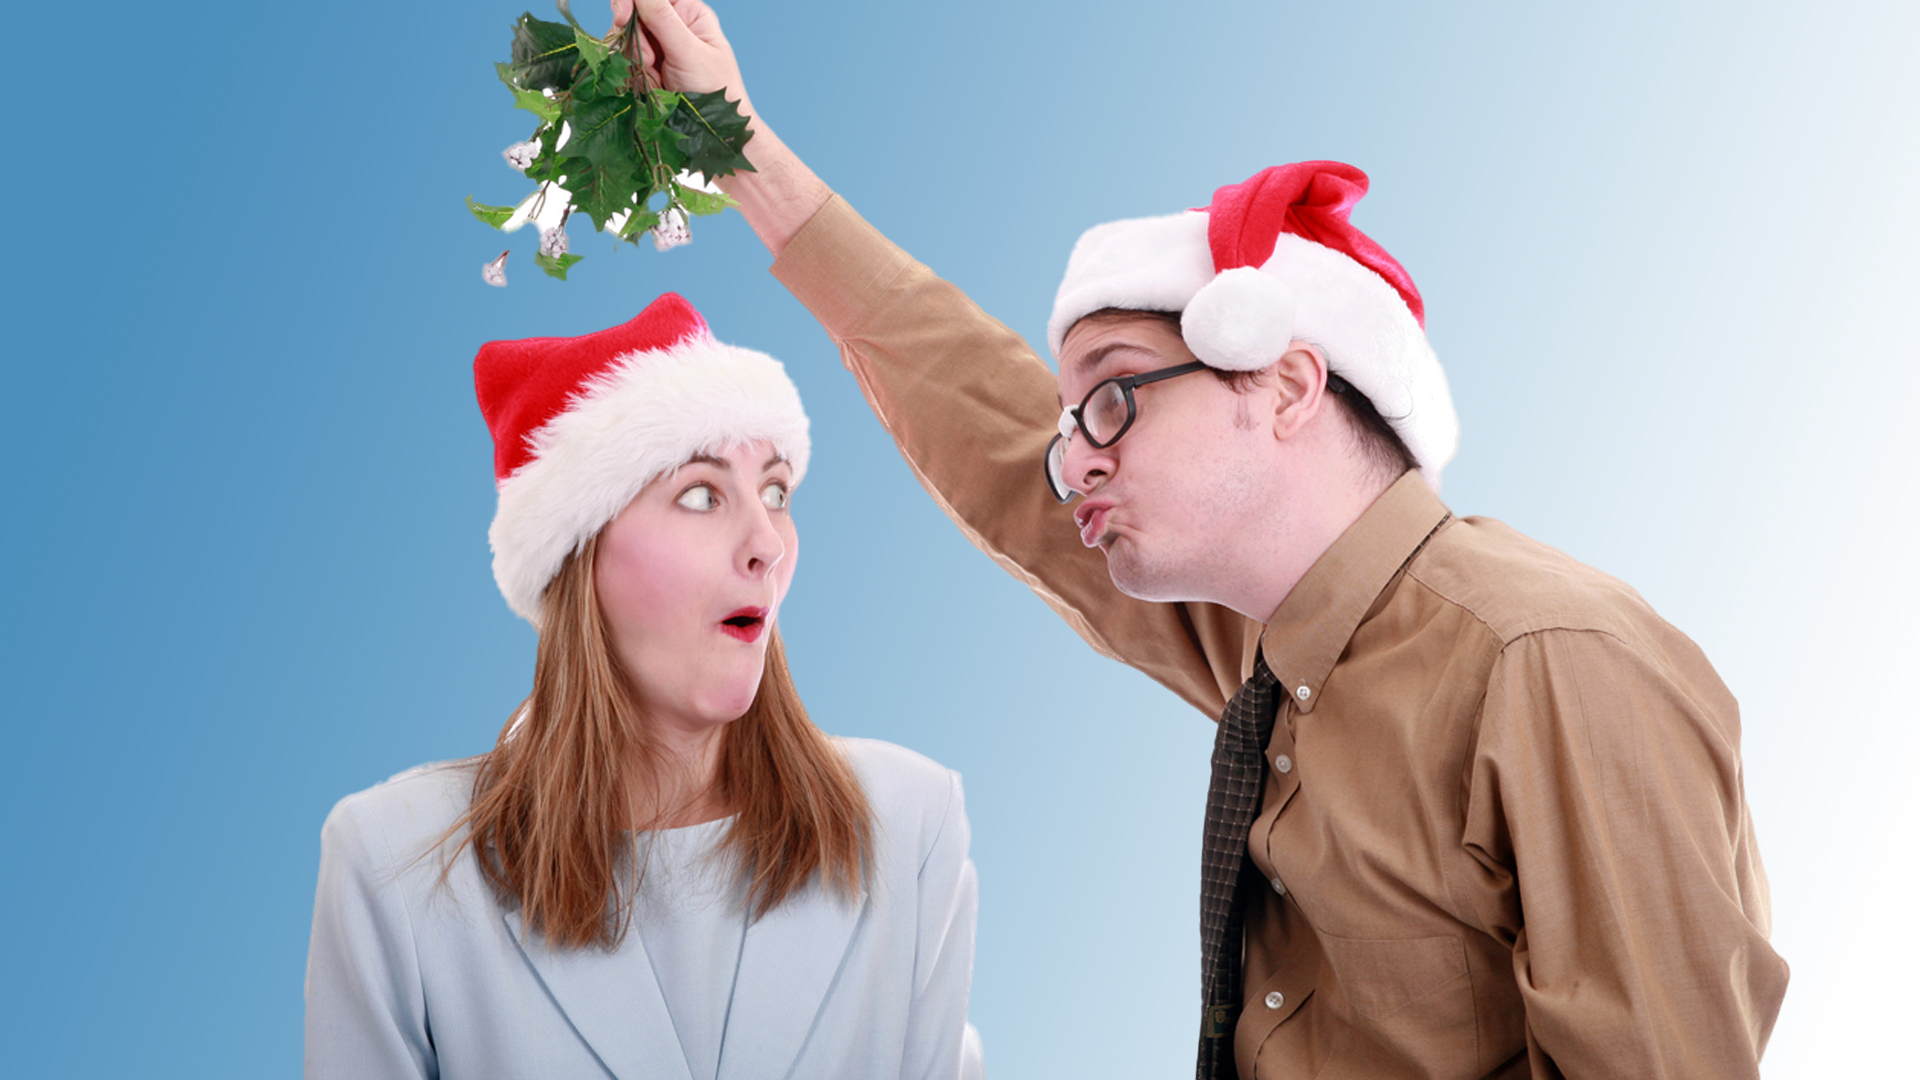 Drunkenly Hooking Up With Your Boss Is Just One Christmas Party Pitfall